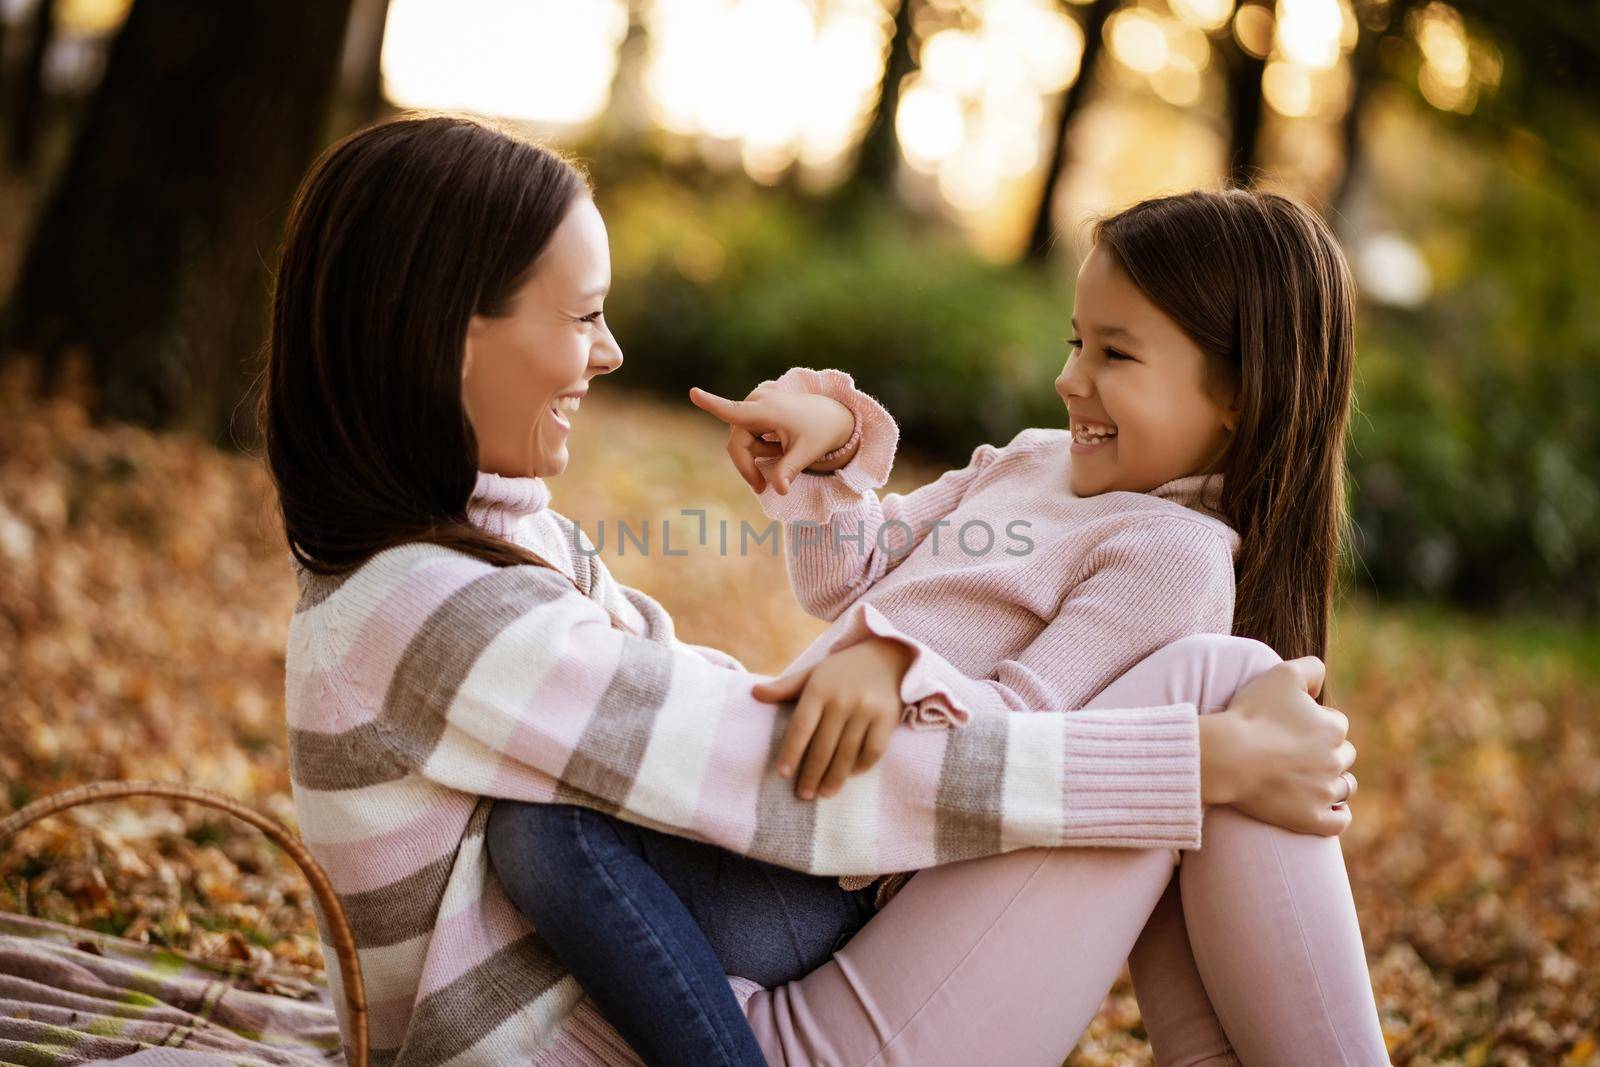 Mother and daughter enjoying autumn in park.